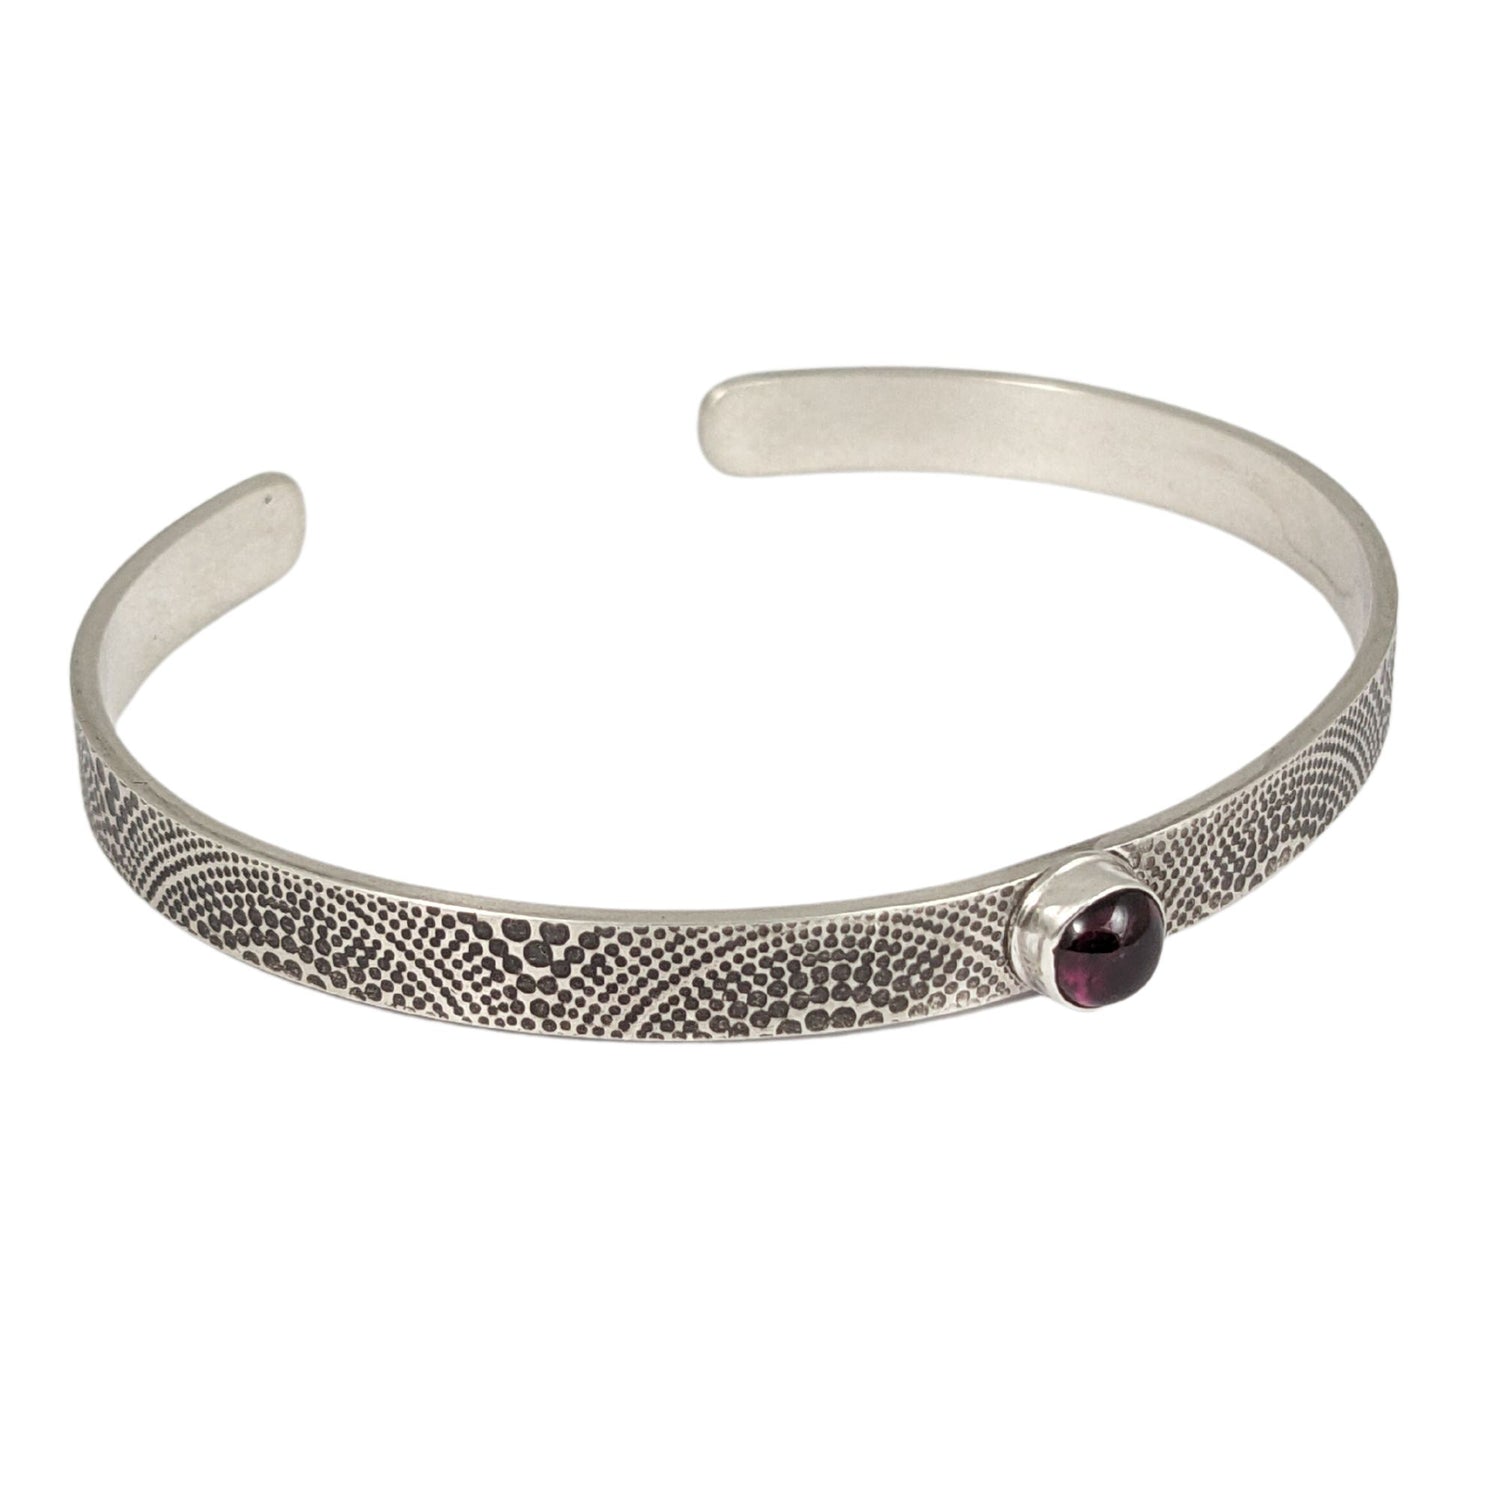 Narrow sterling silver cuff bracelet. The silver is covered with an arch pattern. In the center is a red garnet gemstone.